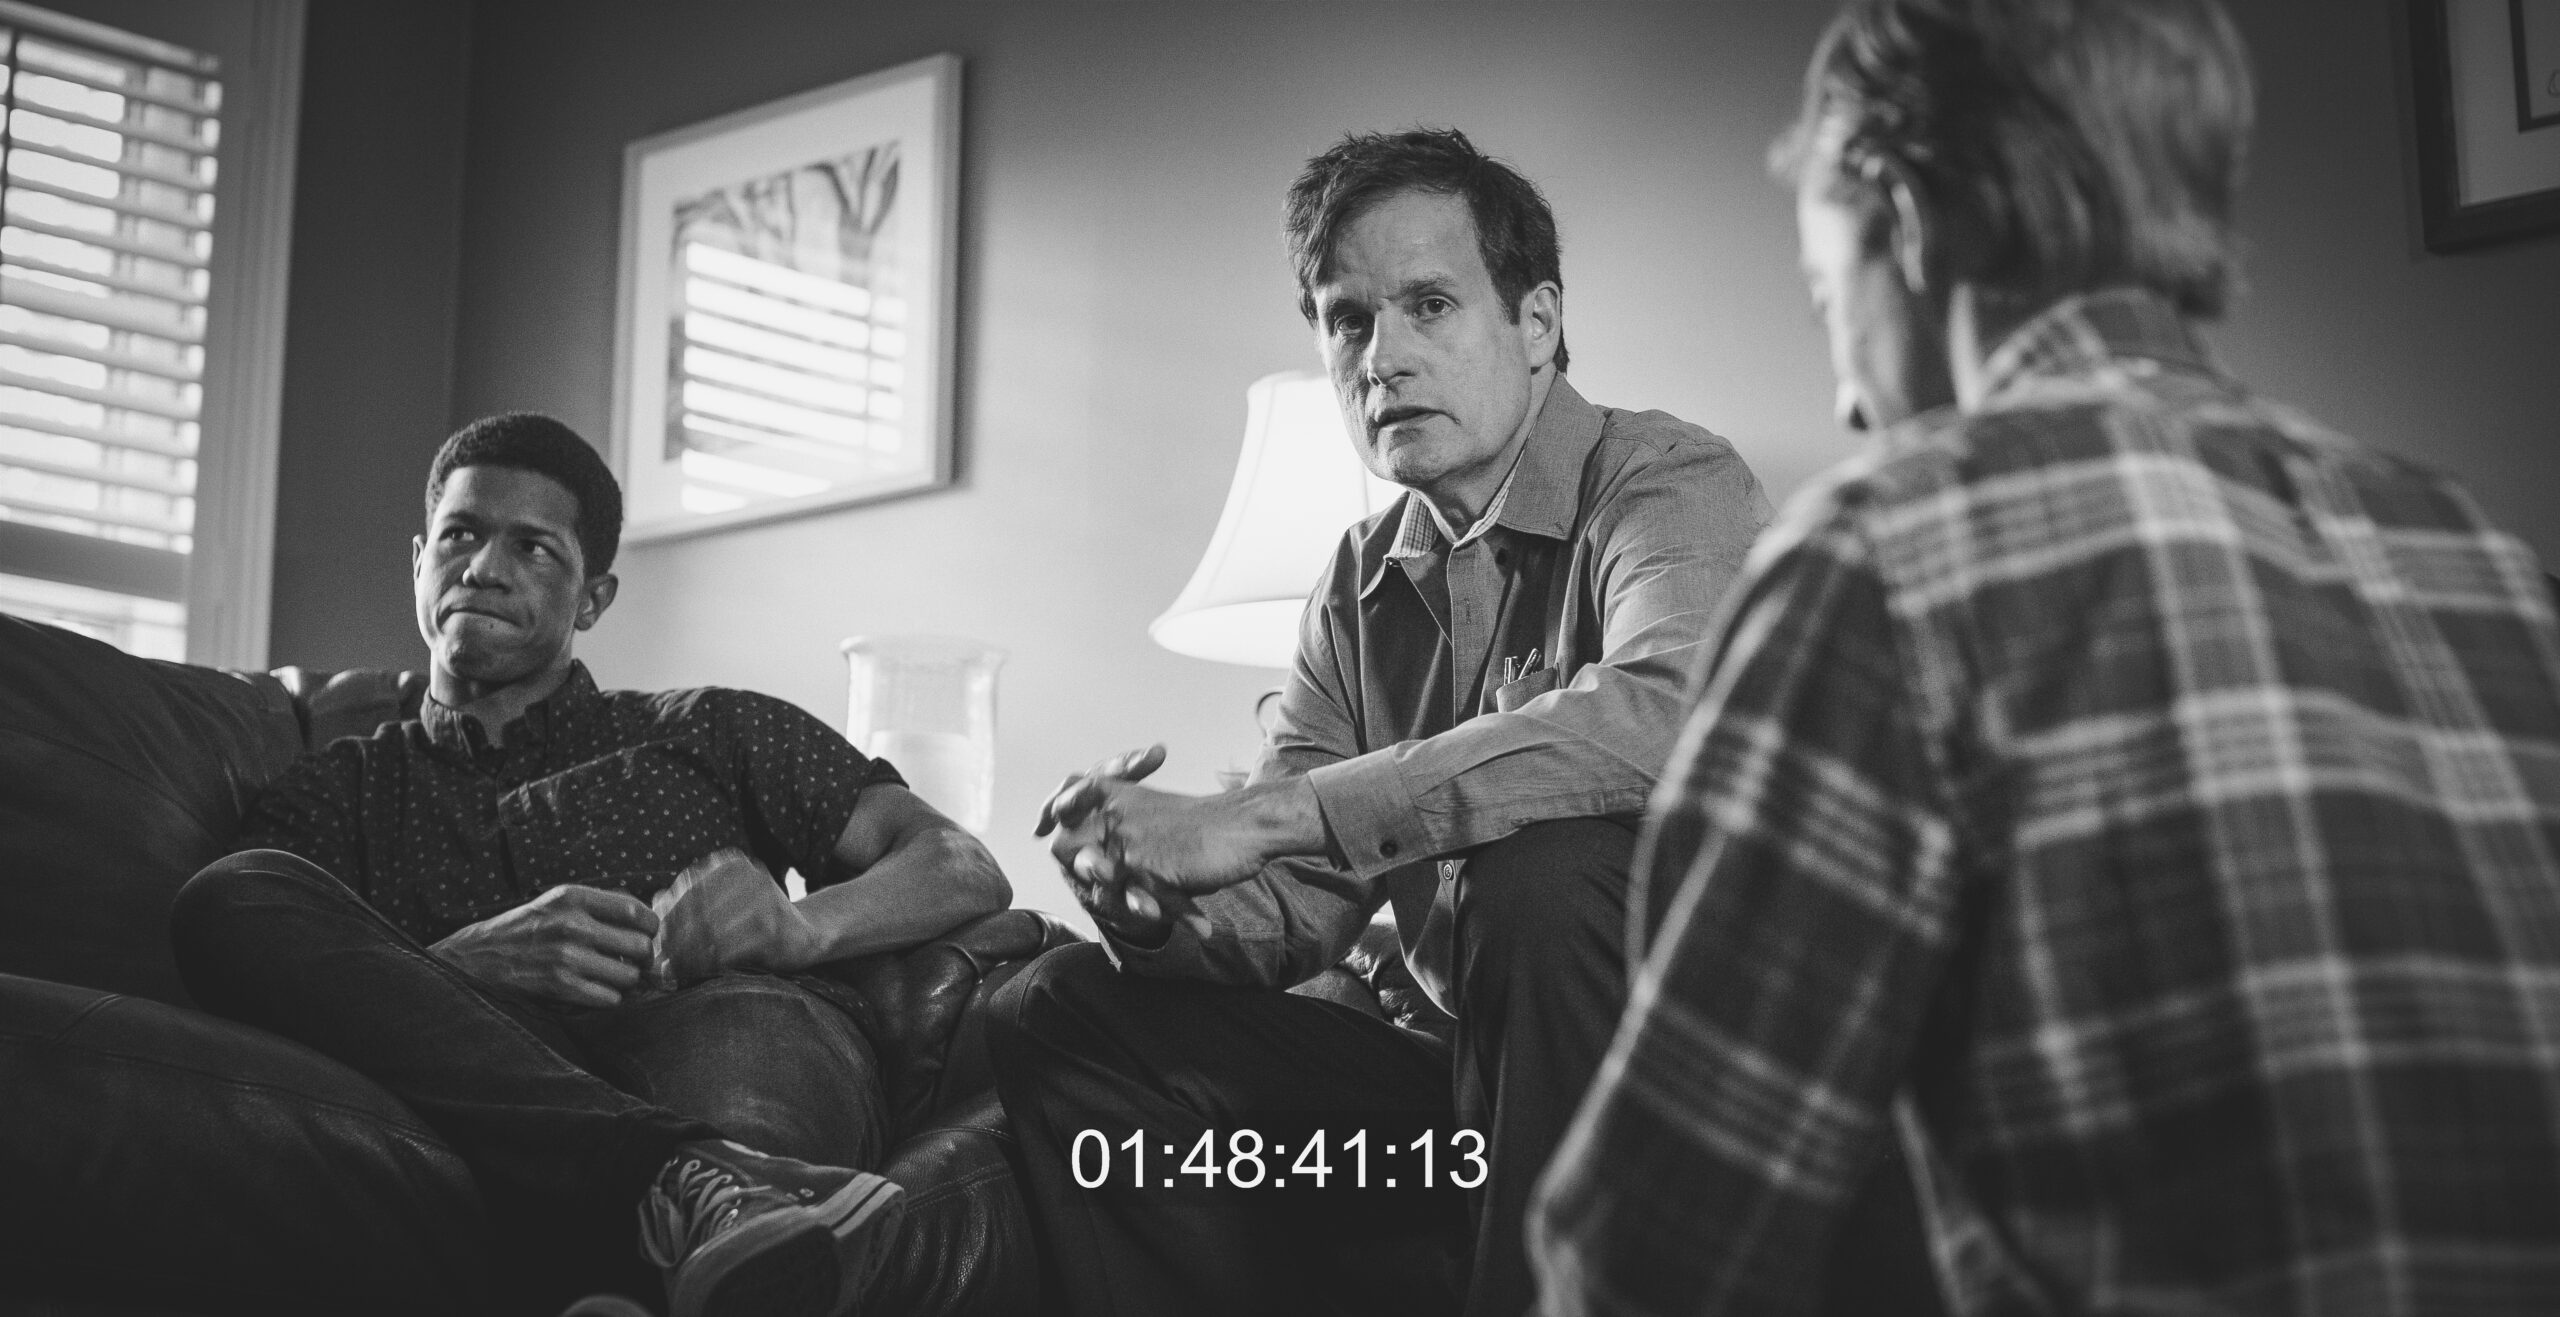 Actors in the short drama film 'Love' shot in Chicago by Director of Photography Jason Kraynek